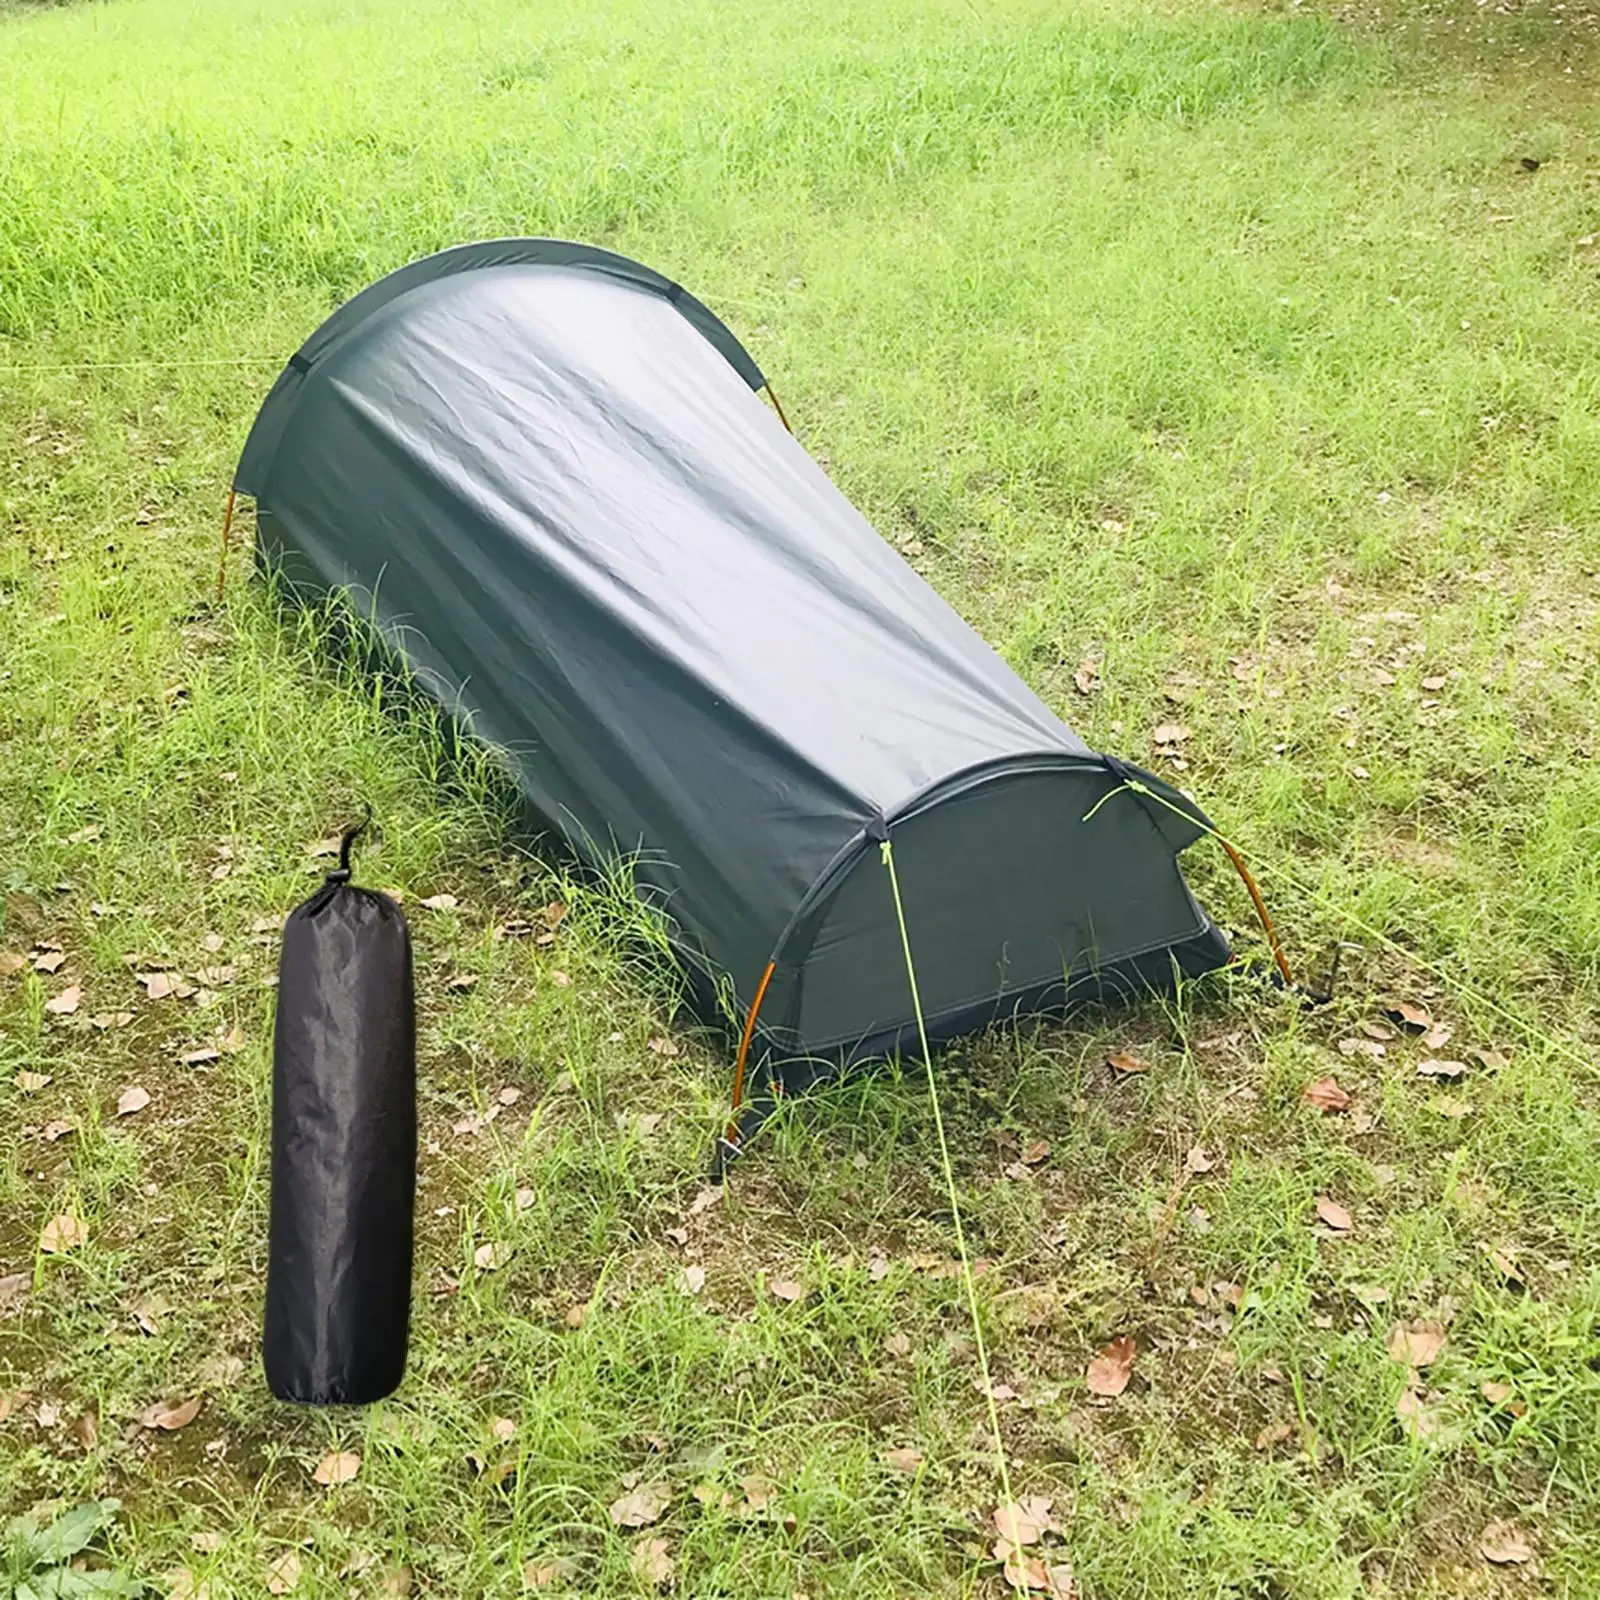 Portable Camping Tent Waterproof Sleeping Bag 1 Person Bushcraft Shelter for Fishing Festival Outdoor Activities Mountaineering